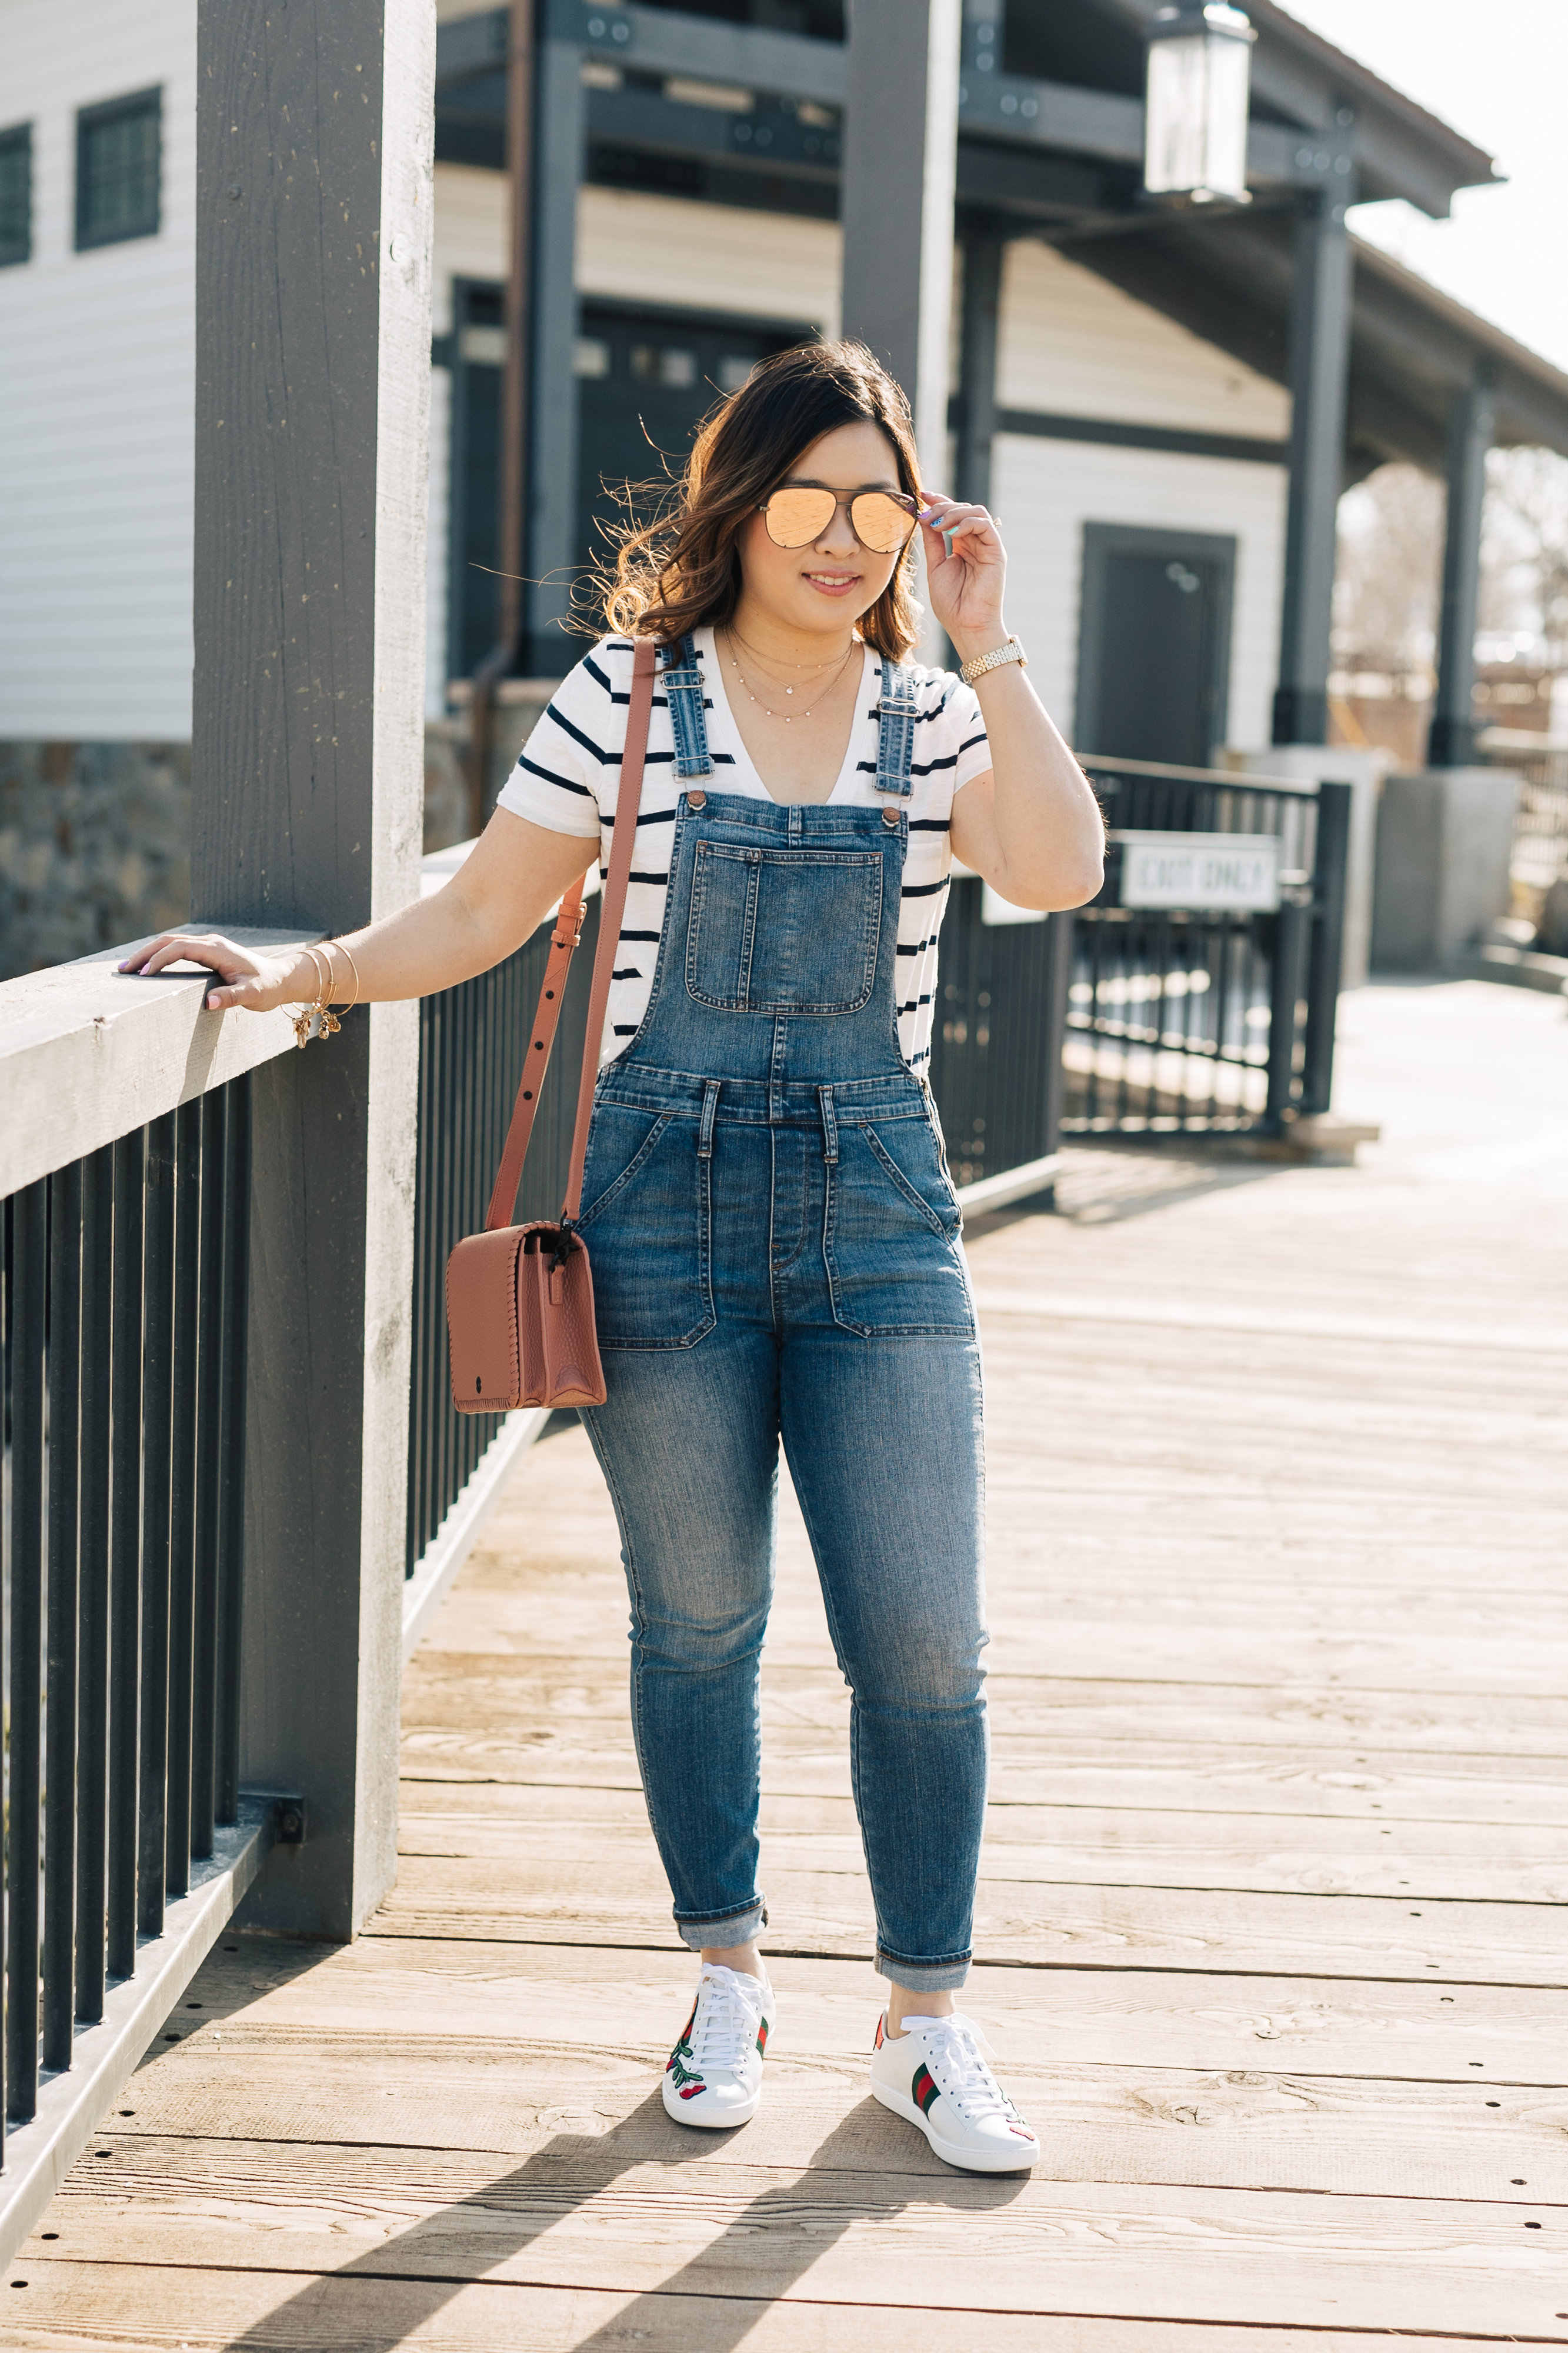 Chic Ways to Style Overalls